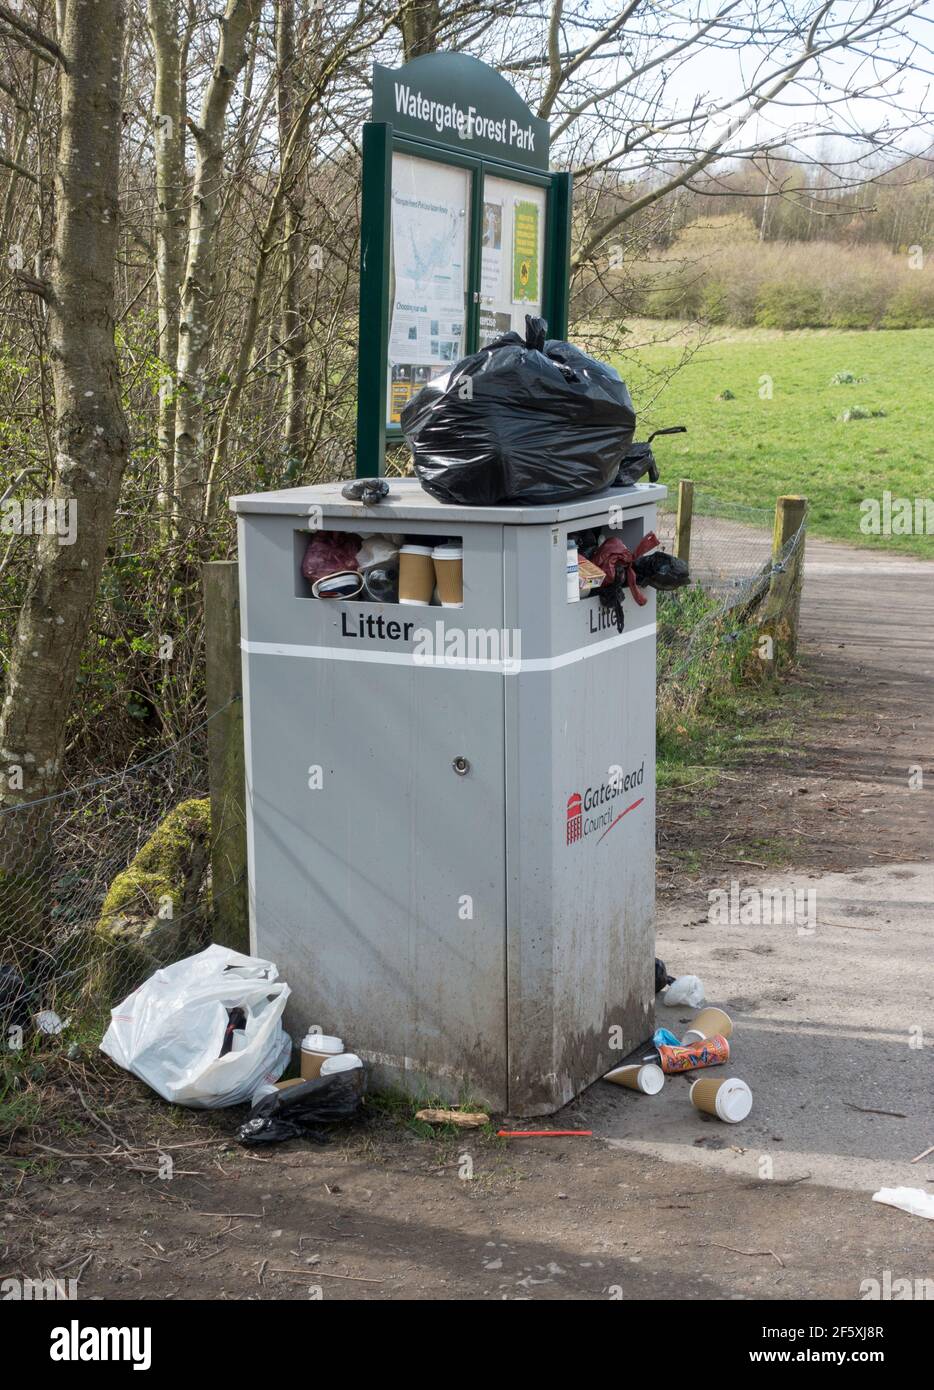 A litter bin overflowing, north east England UK Stock Photo